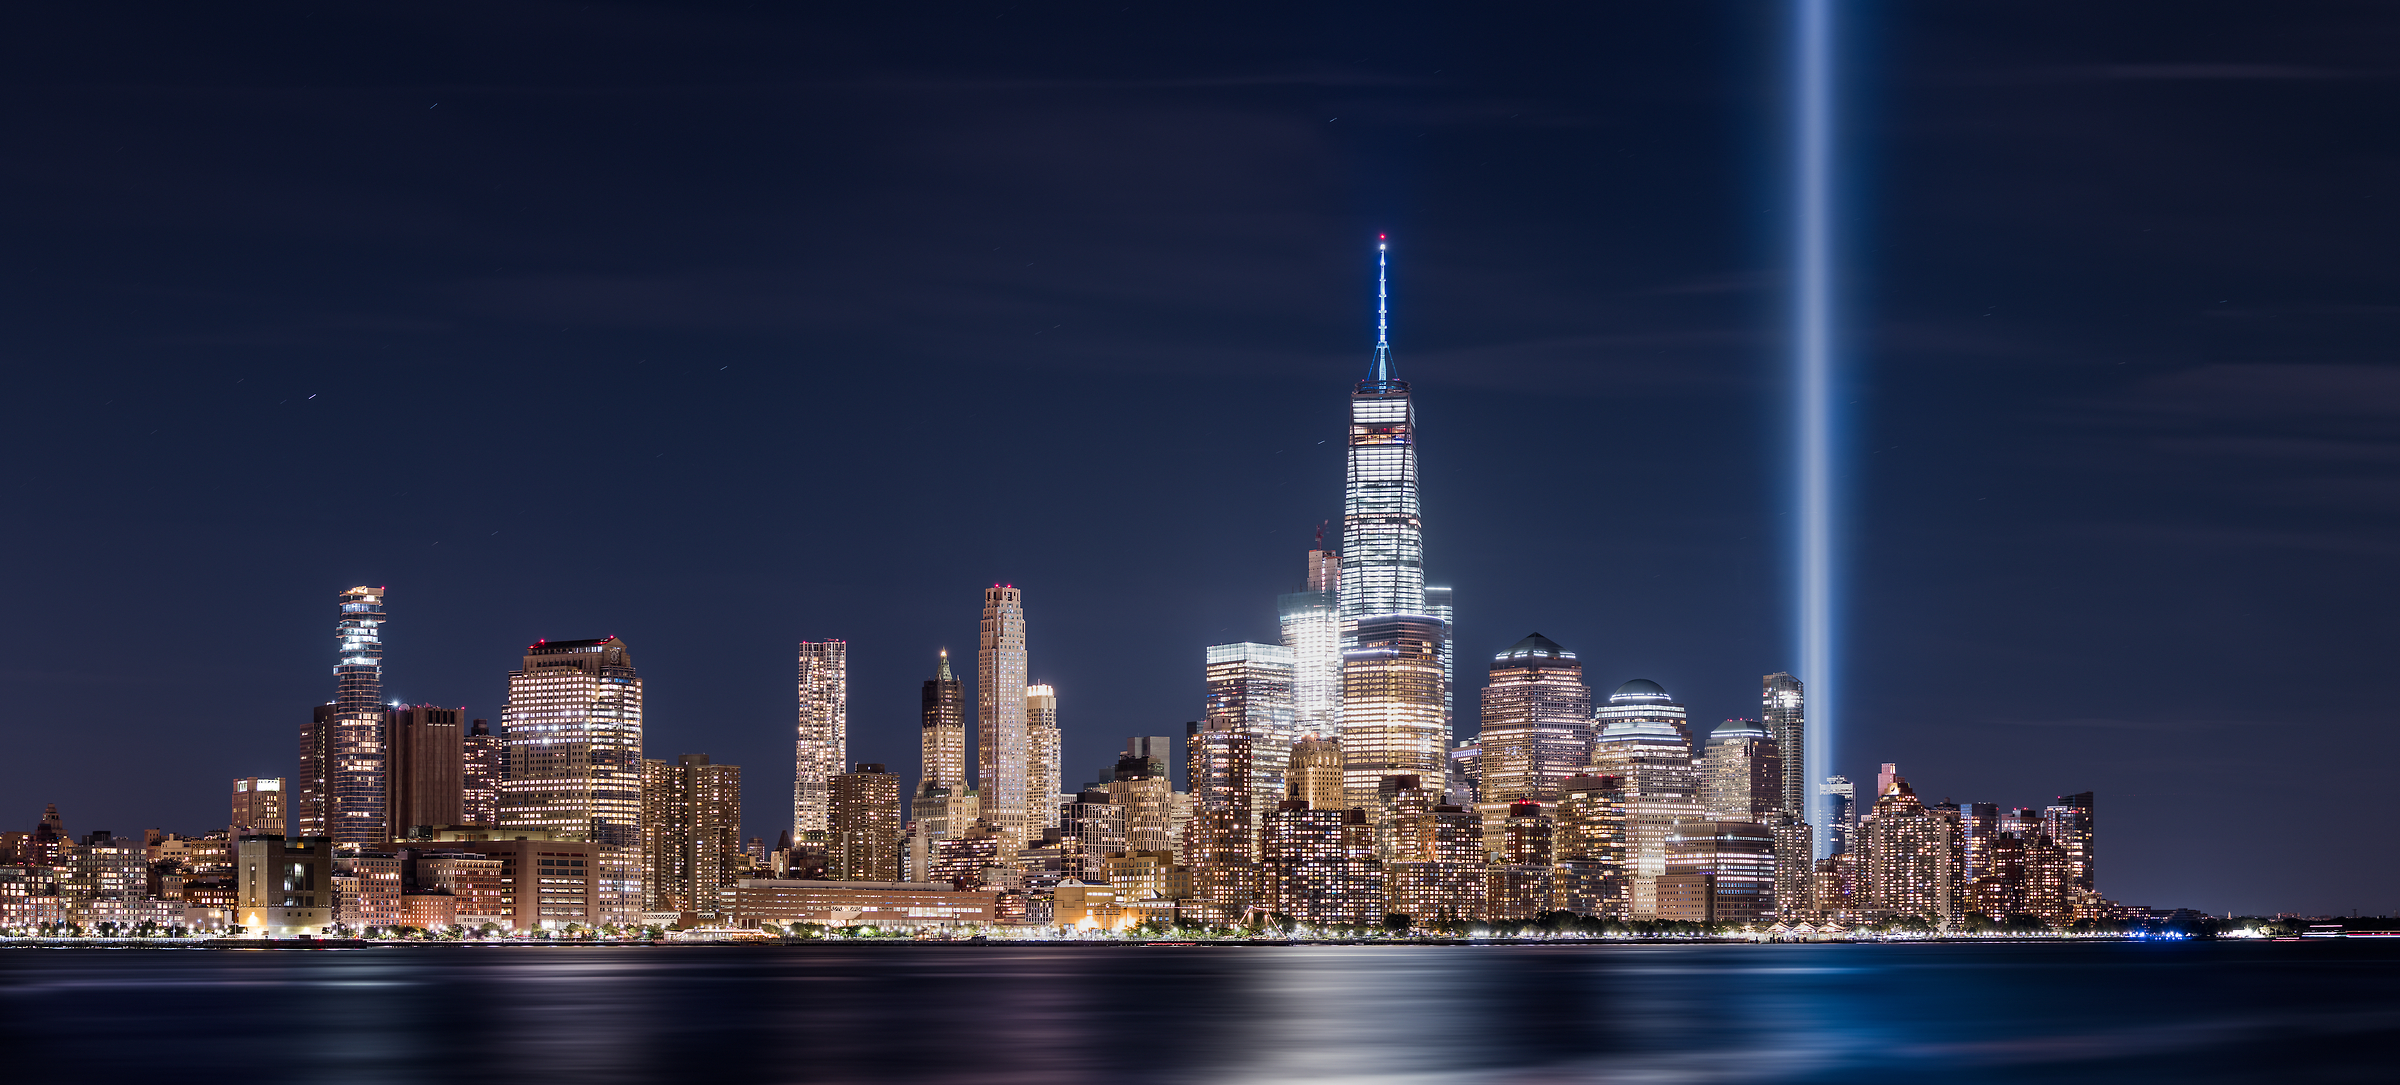 173 megapixels! A very high definition VAST photo of the September 11th 9/11 Tribute in Light memorial, the World Trade Center, and the Manhattan city skyline in New York City; created by Dan Piech.